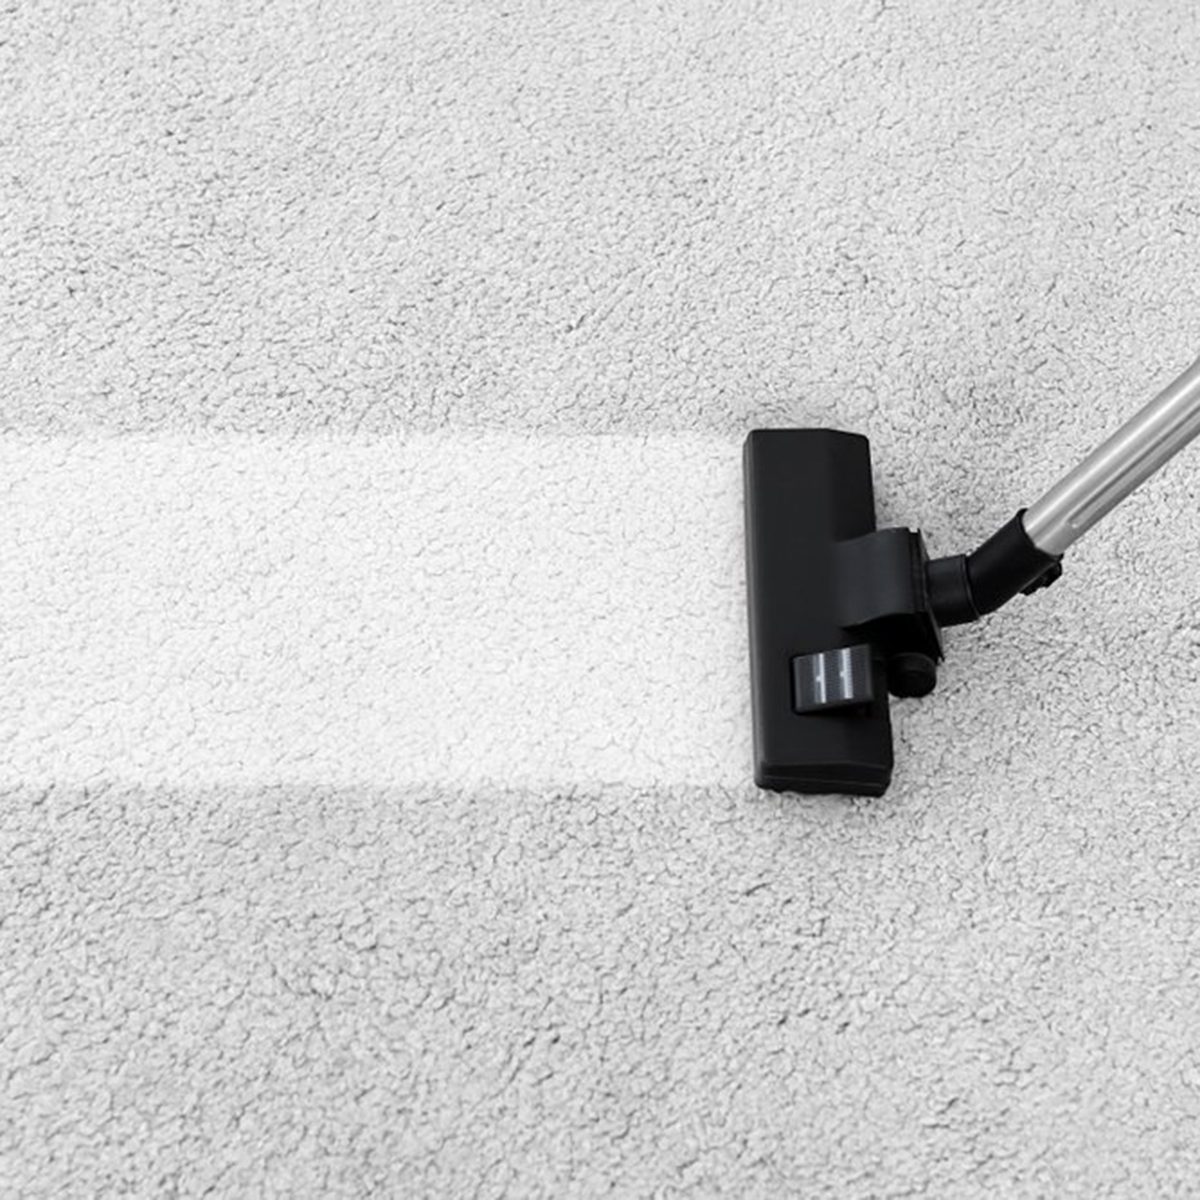 Cleaning carpet with vacuum